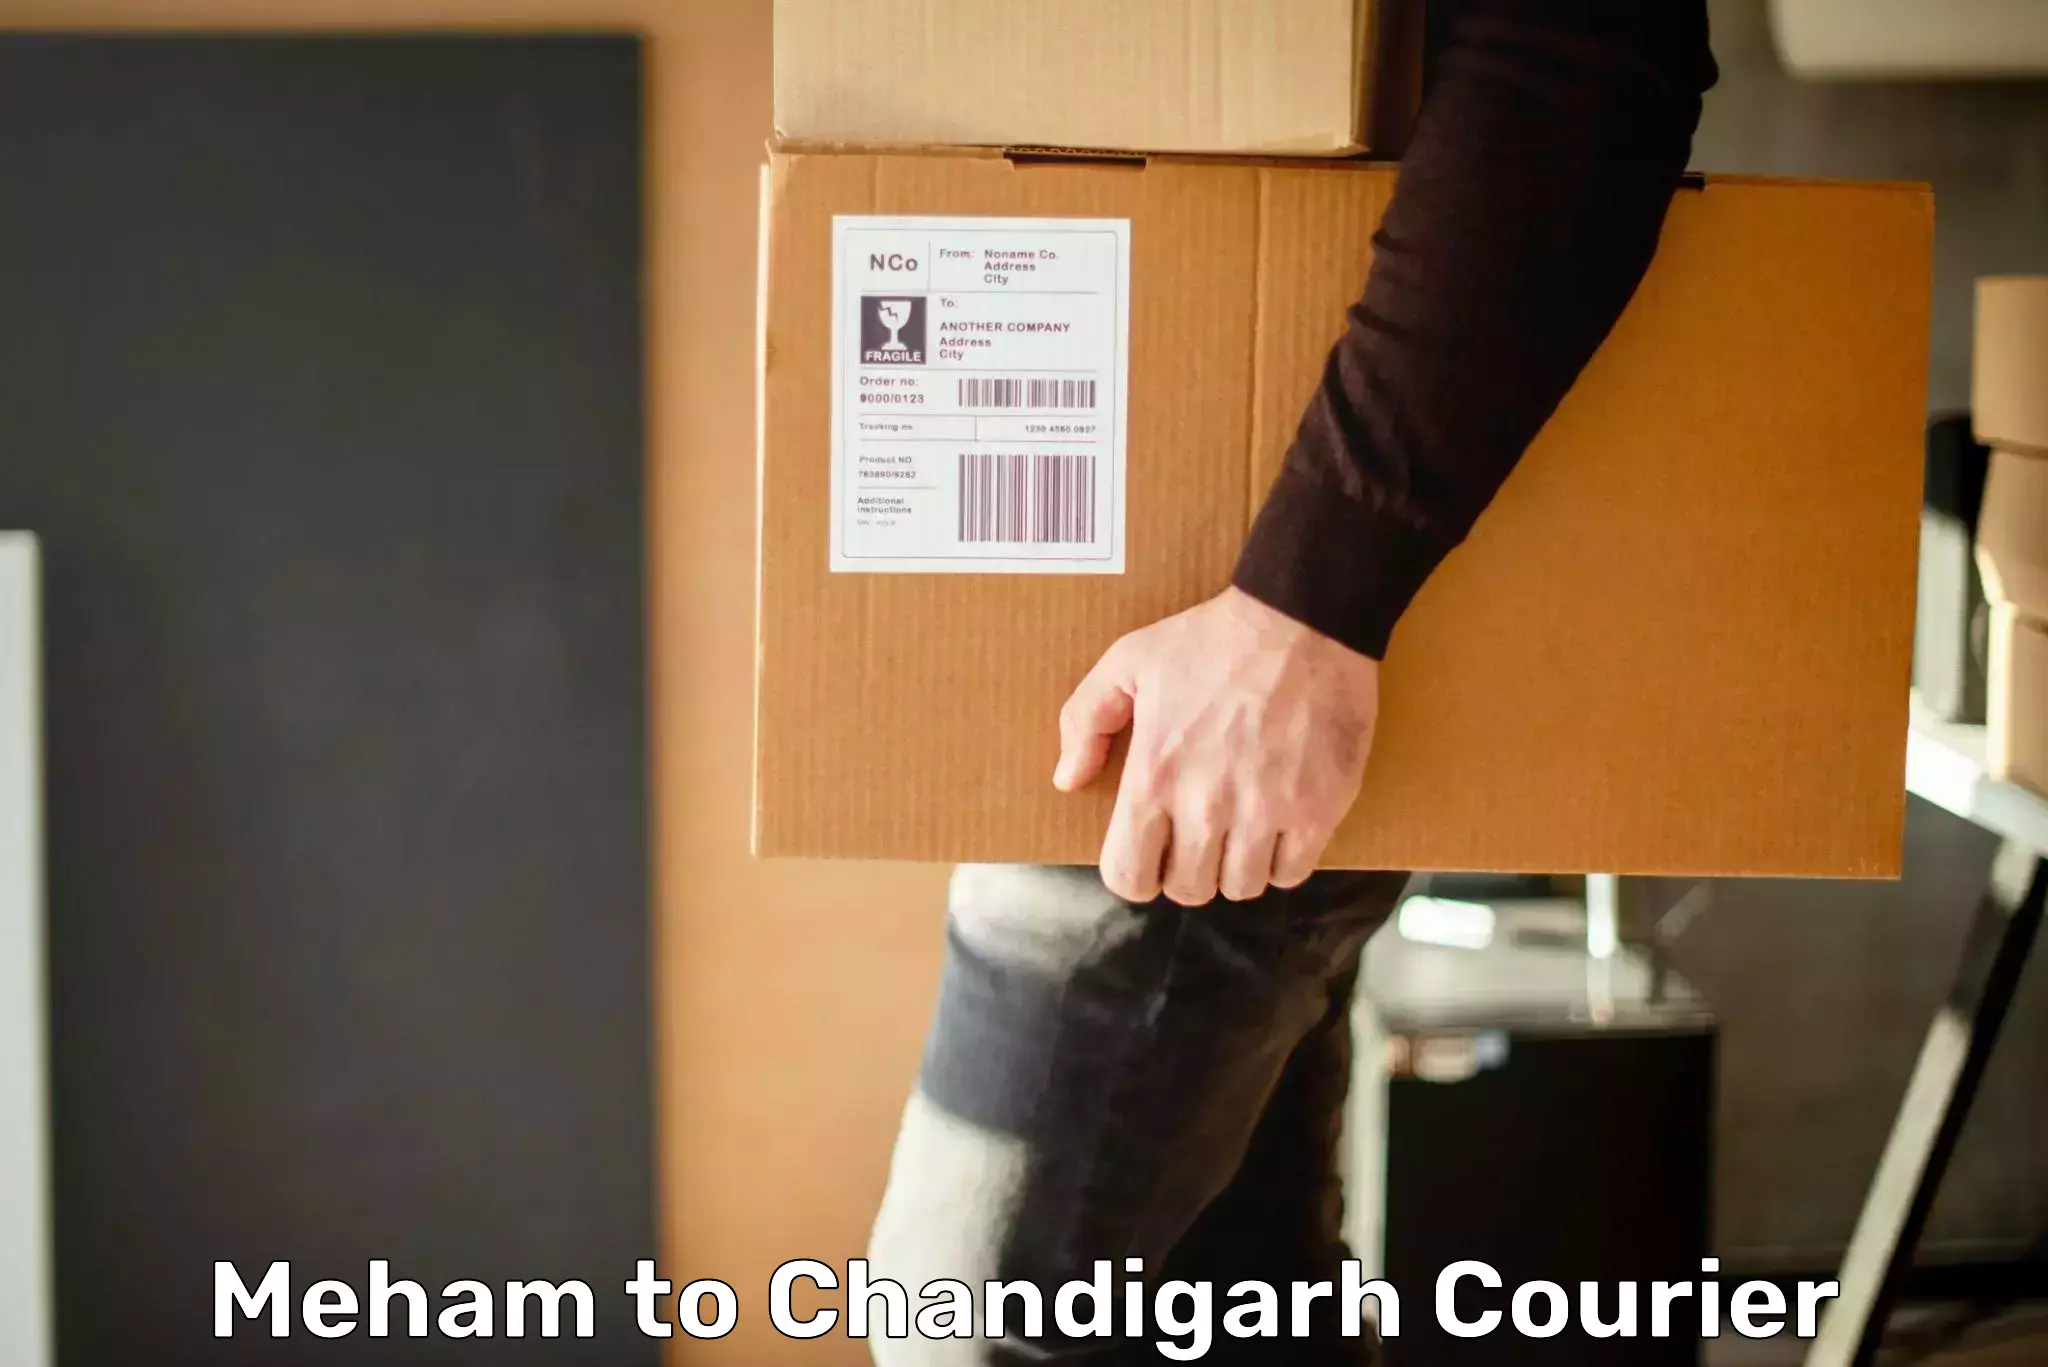 Nationwide parcel services Meham to Chandigarh